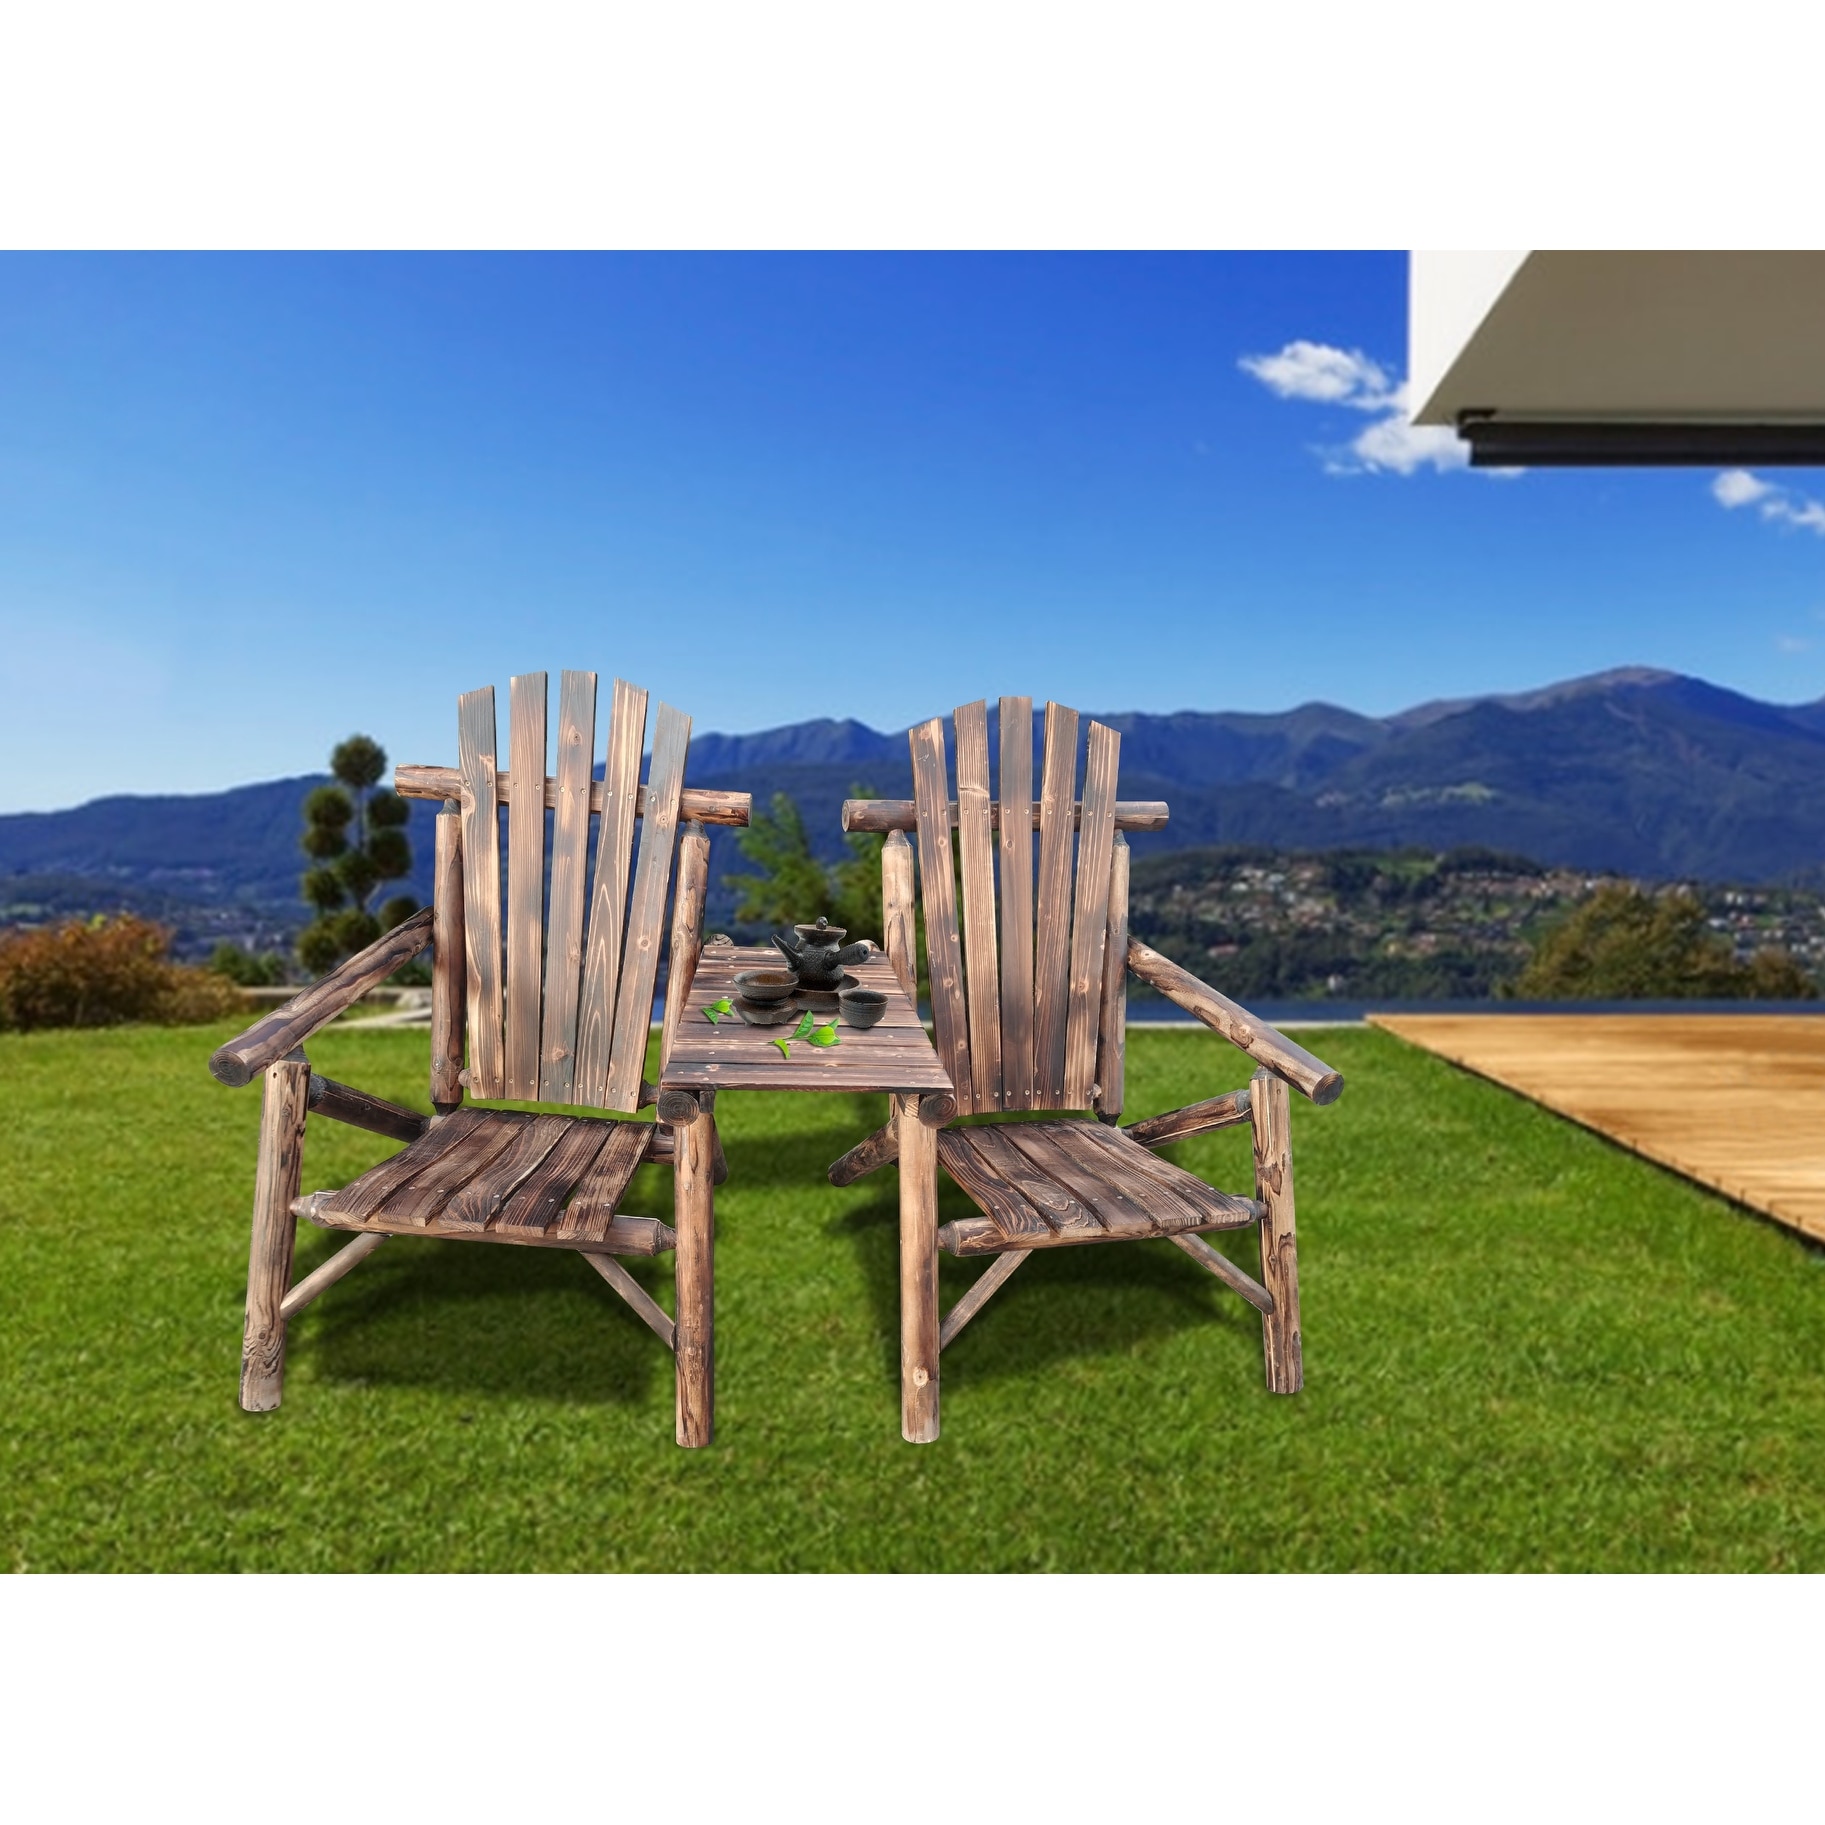 Outdoor Rustic Style Solid Wood Antique Porch Loveseat Adirondack Chair With Tray-table